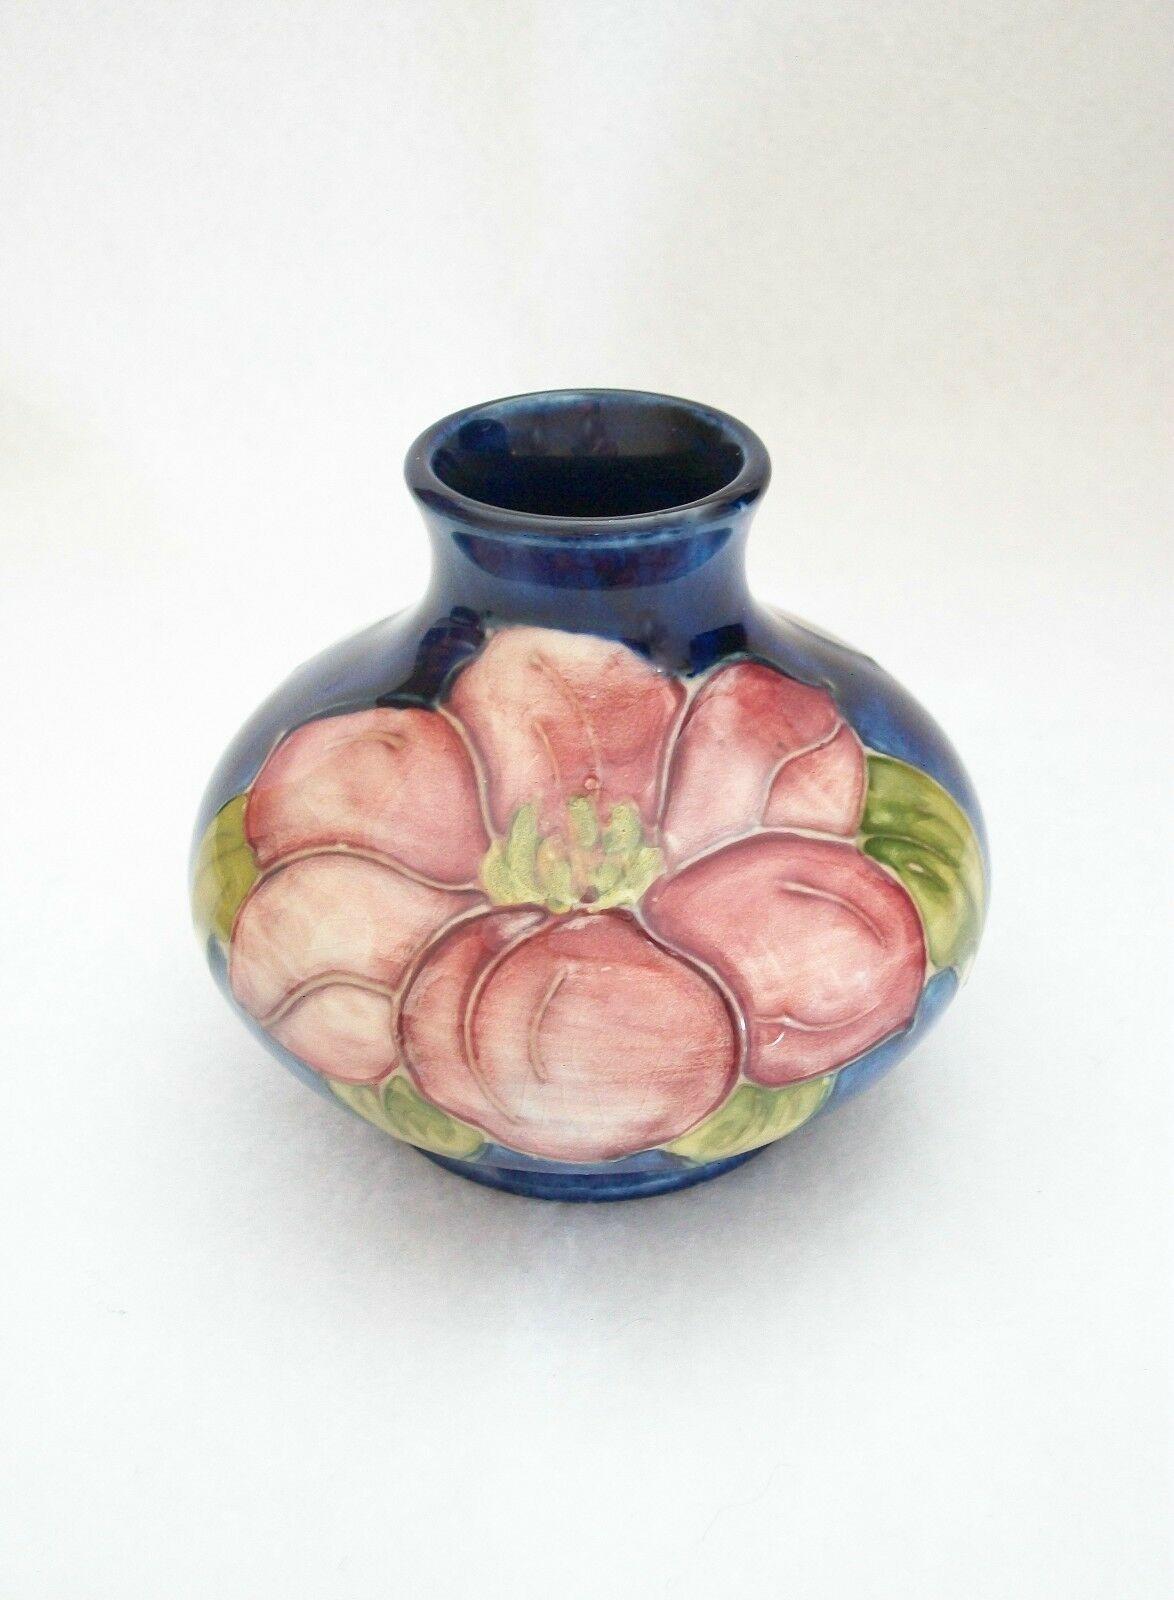 MOORCROFT - 'Clematis' - Vintage Arts & Crafts ceramic vase - hand painted with a blue background - impressed stamps to the base - U.K. - circa 1950-86. 

Excellent condition - no loss - no damage - no restoration - minor signs of age and